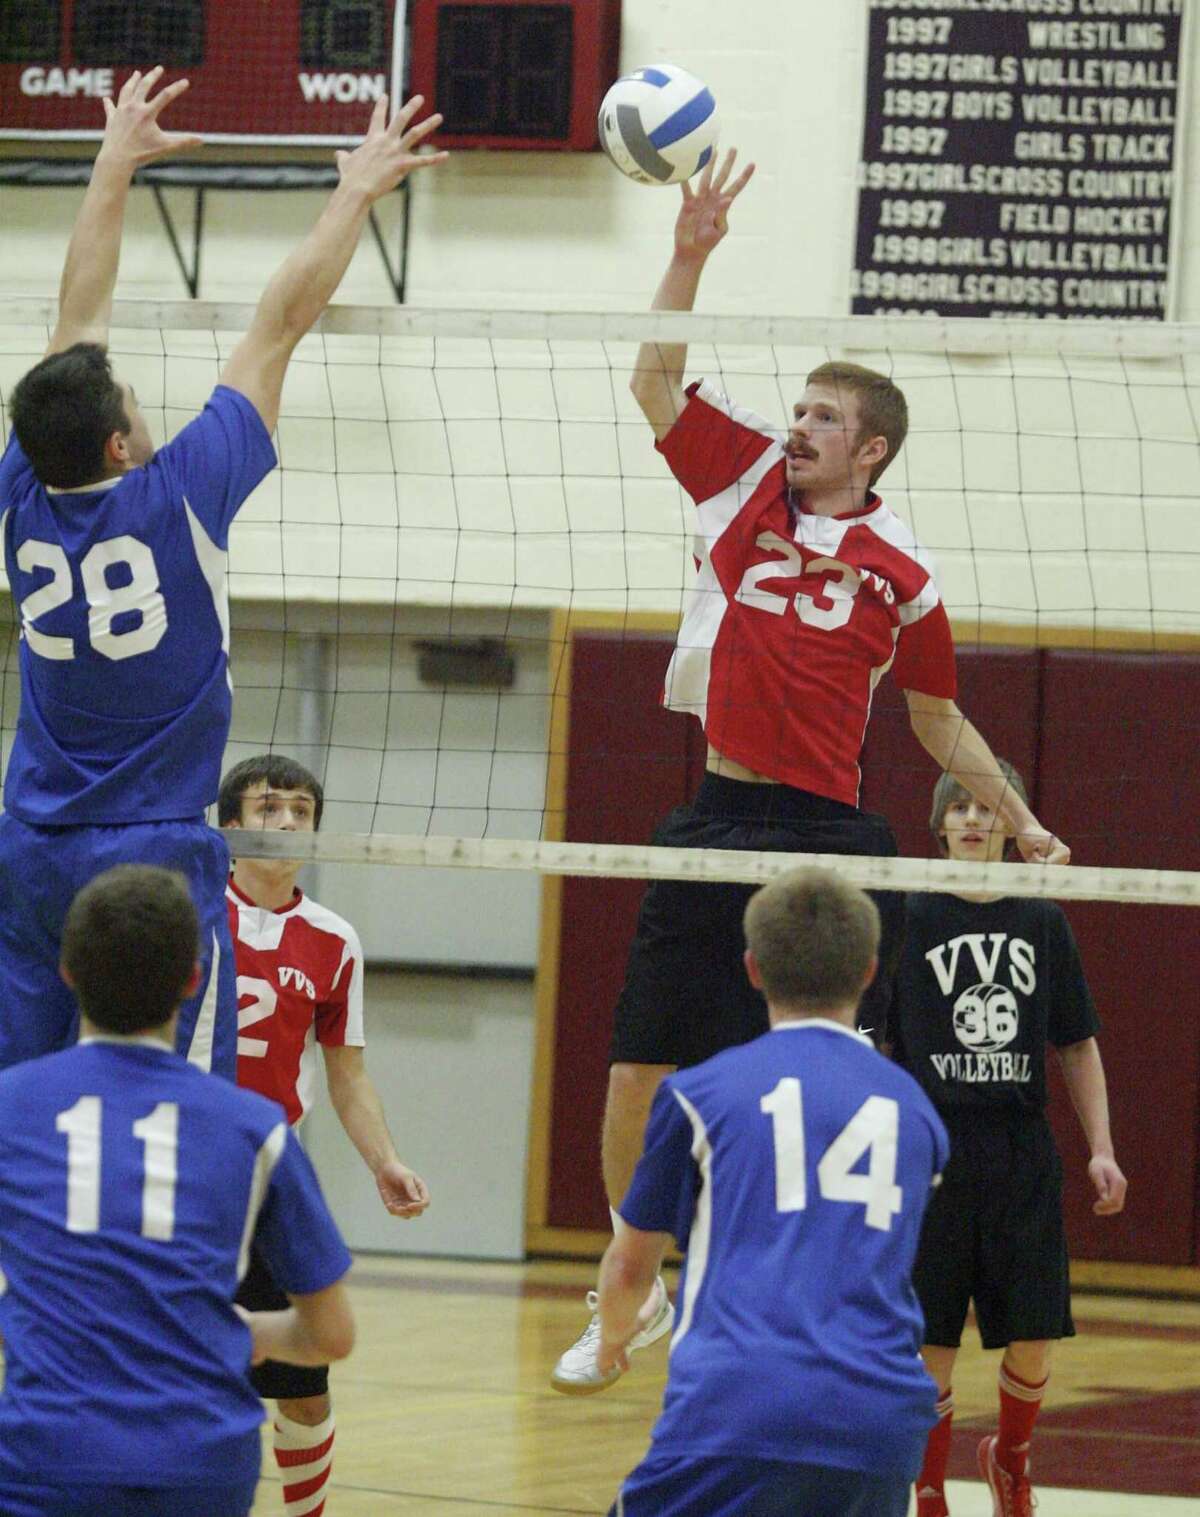 VVS boys volleyball sweeps Living Word Academy to repeat as Class B champs (video)